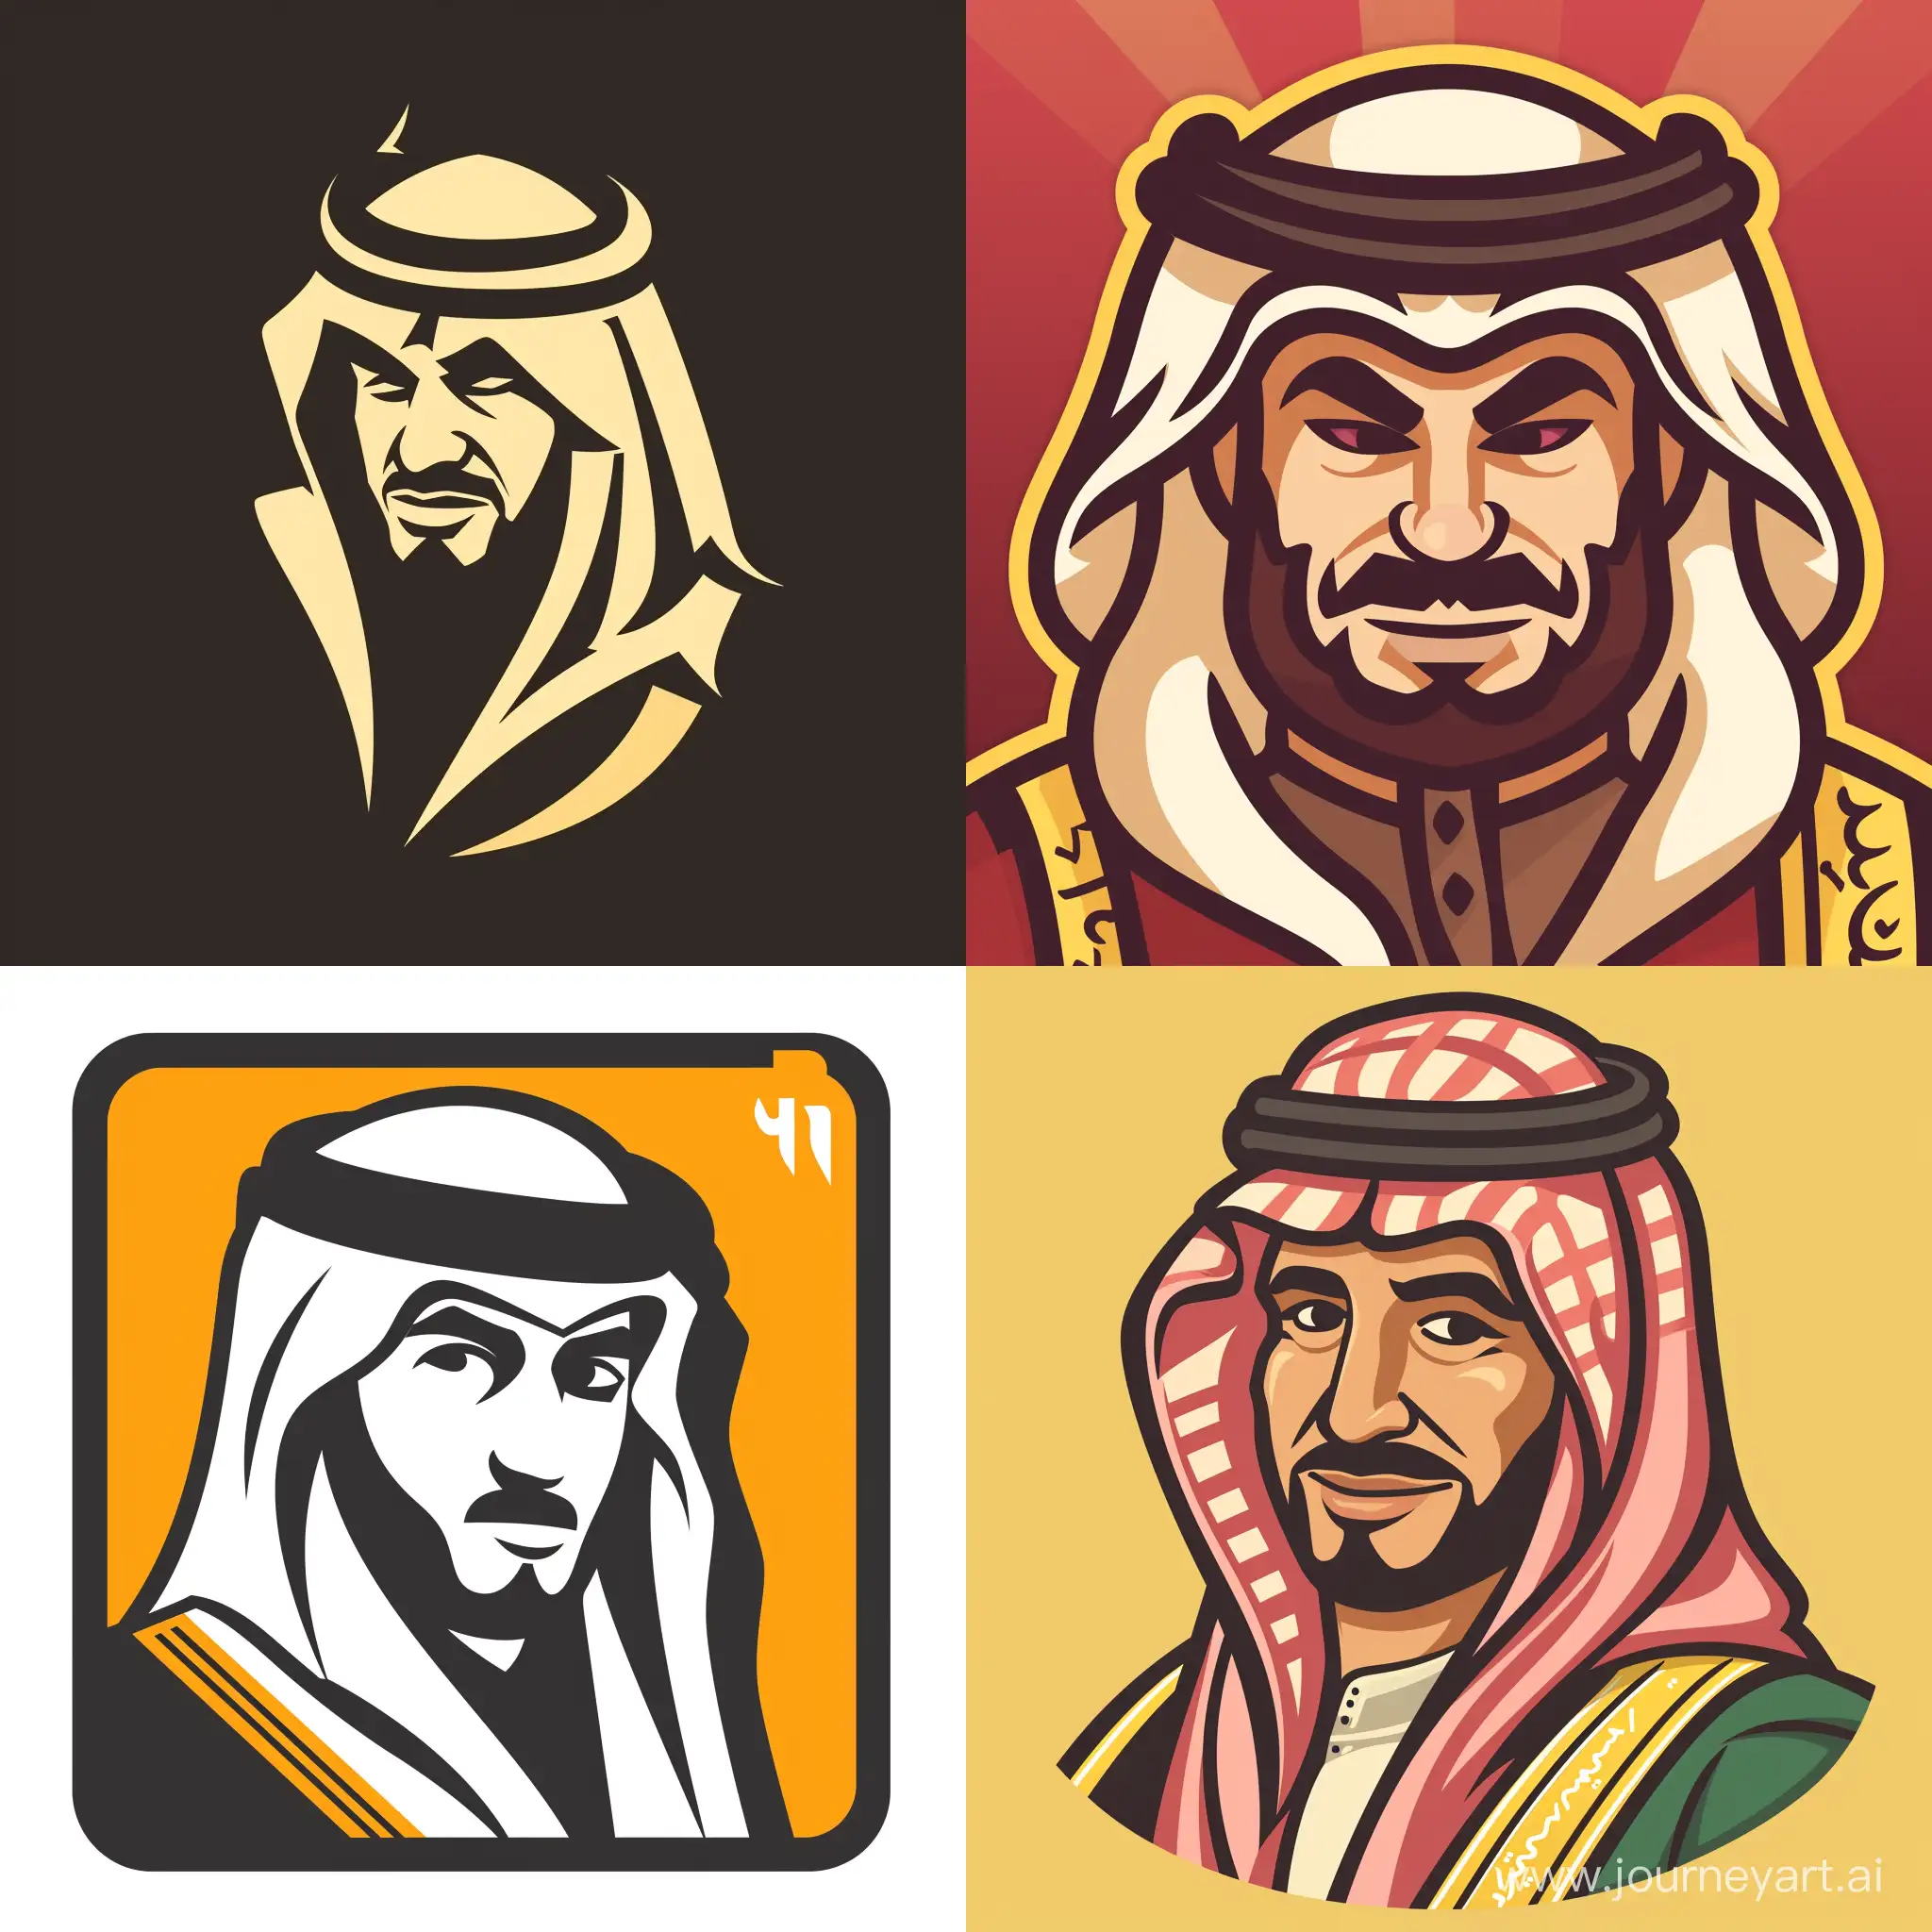 Give me a logo for center Provides a traditional gaming experience with a Saudi theme